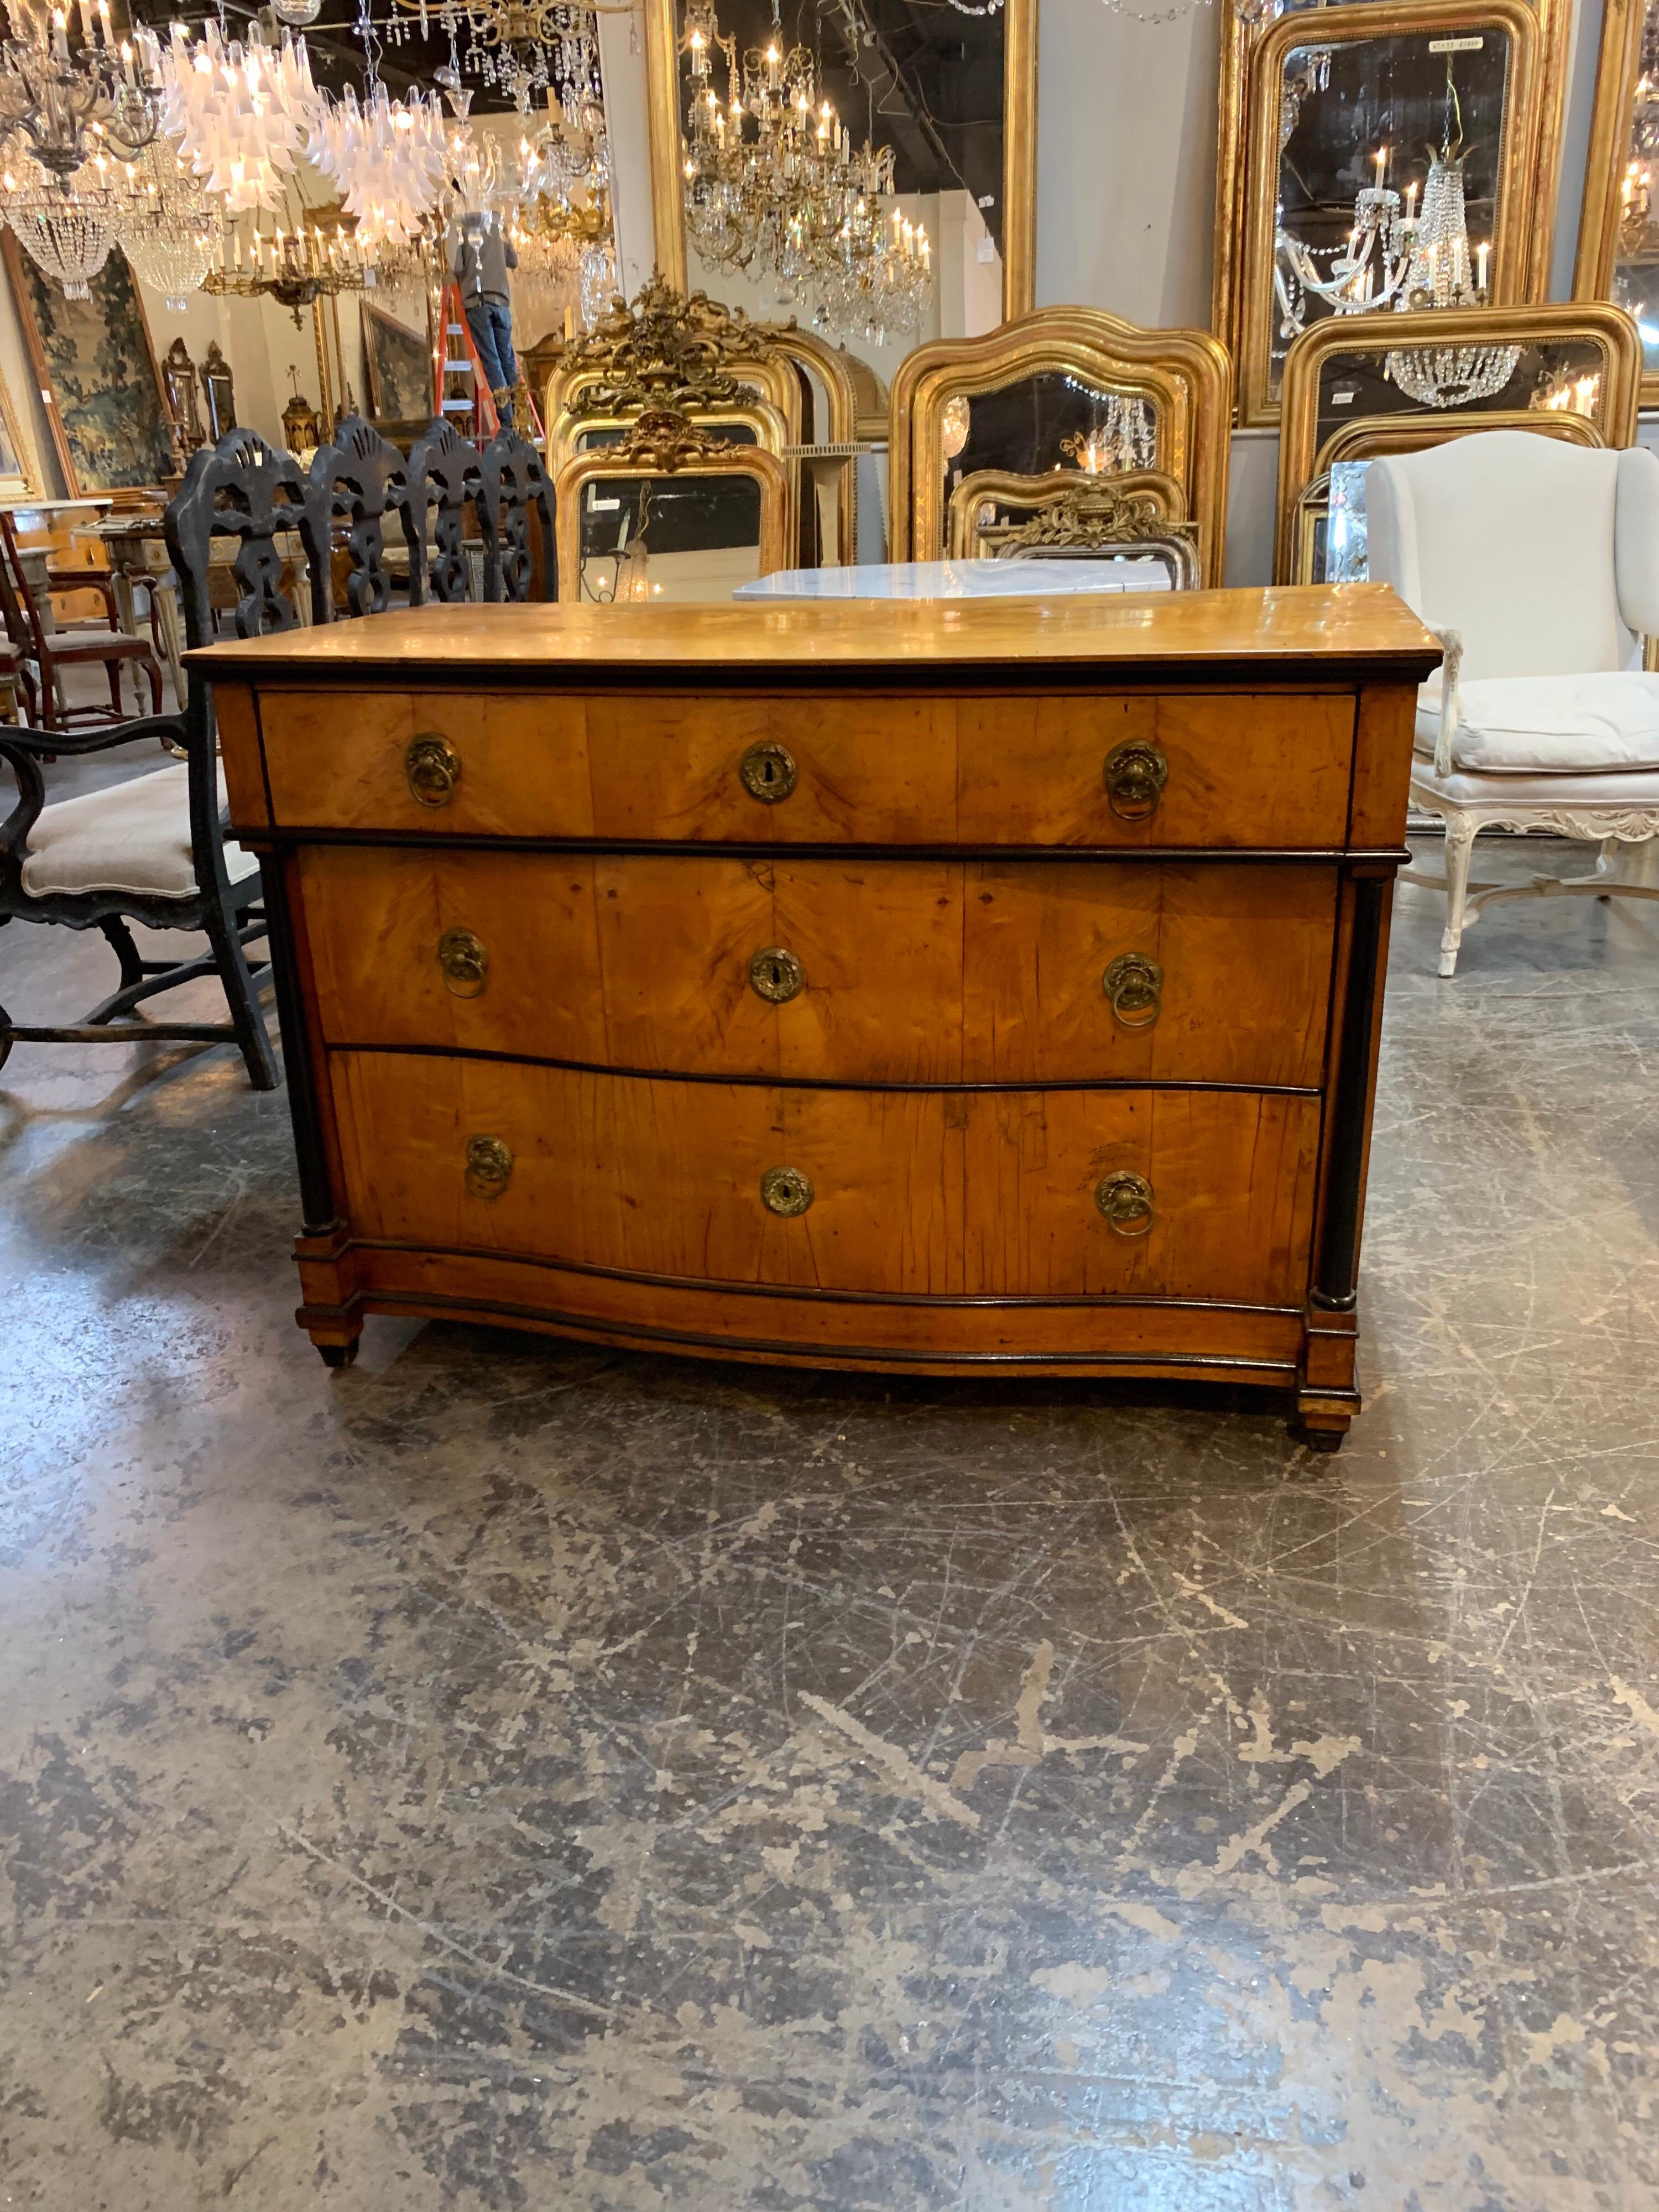 Very handsome German 19th century Biedermeier walnut commode. The piece has nice ebonized details and a beautiful finish. Ample storage as well!